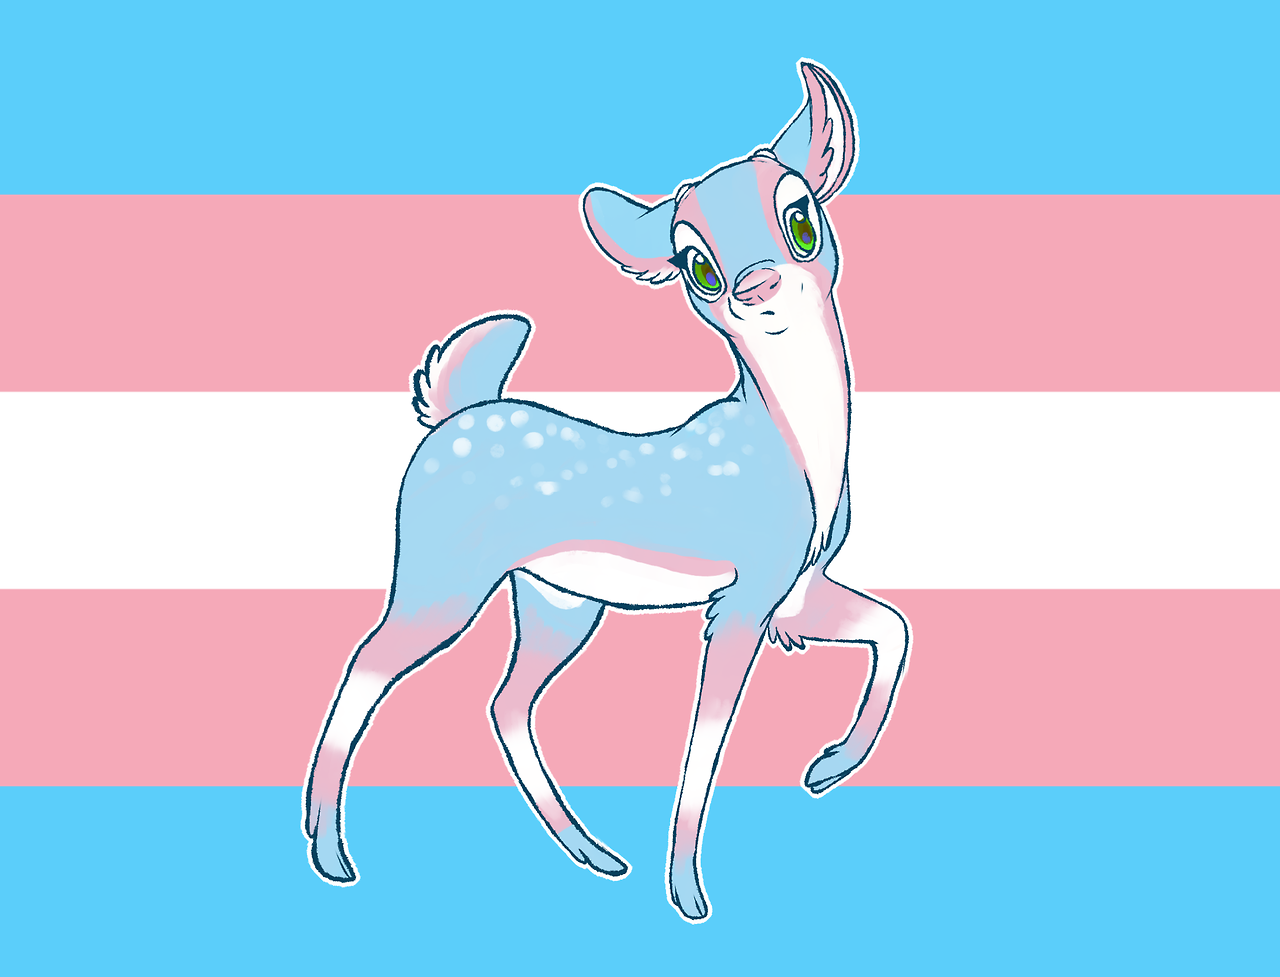 alouette-lulu:  I drew some flag deers for pride month ! Be proud of who you are